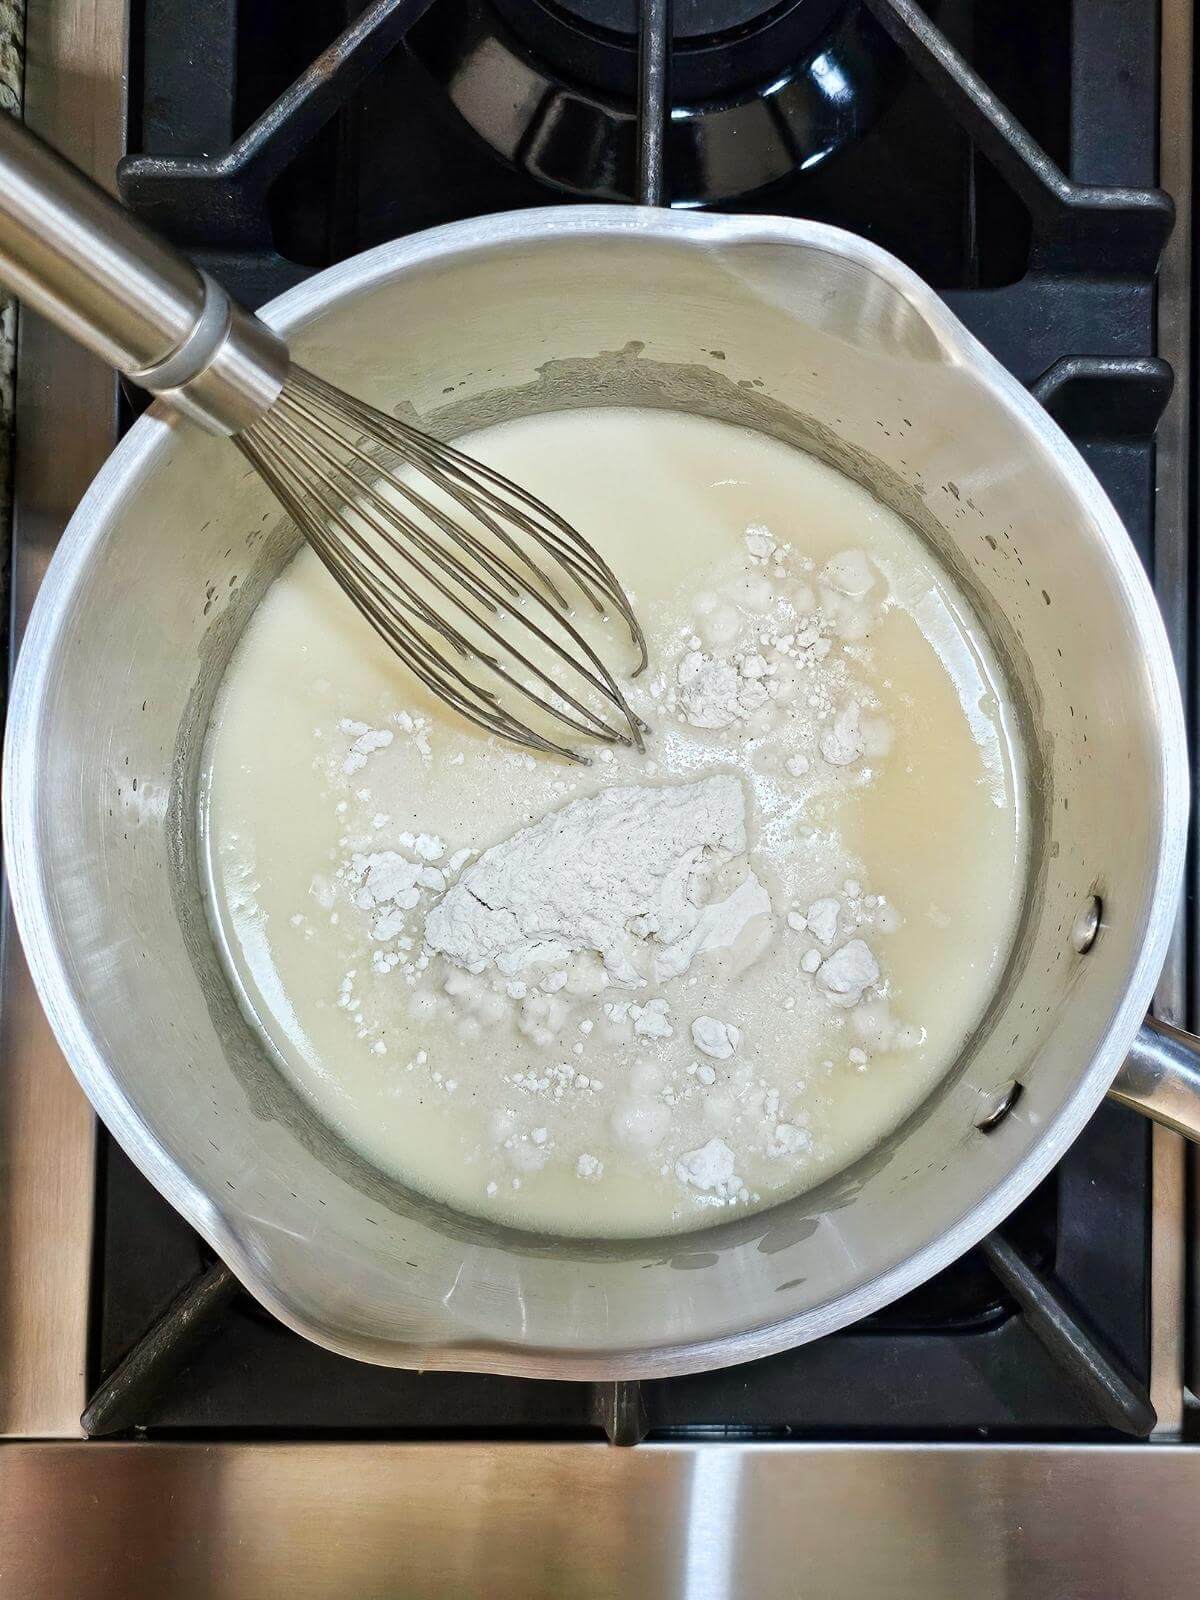 Flour, milk and a whisk in a pot.